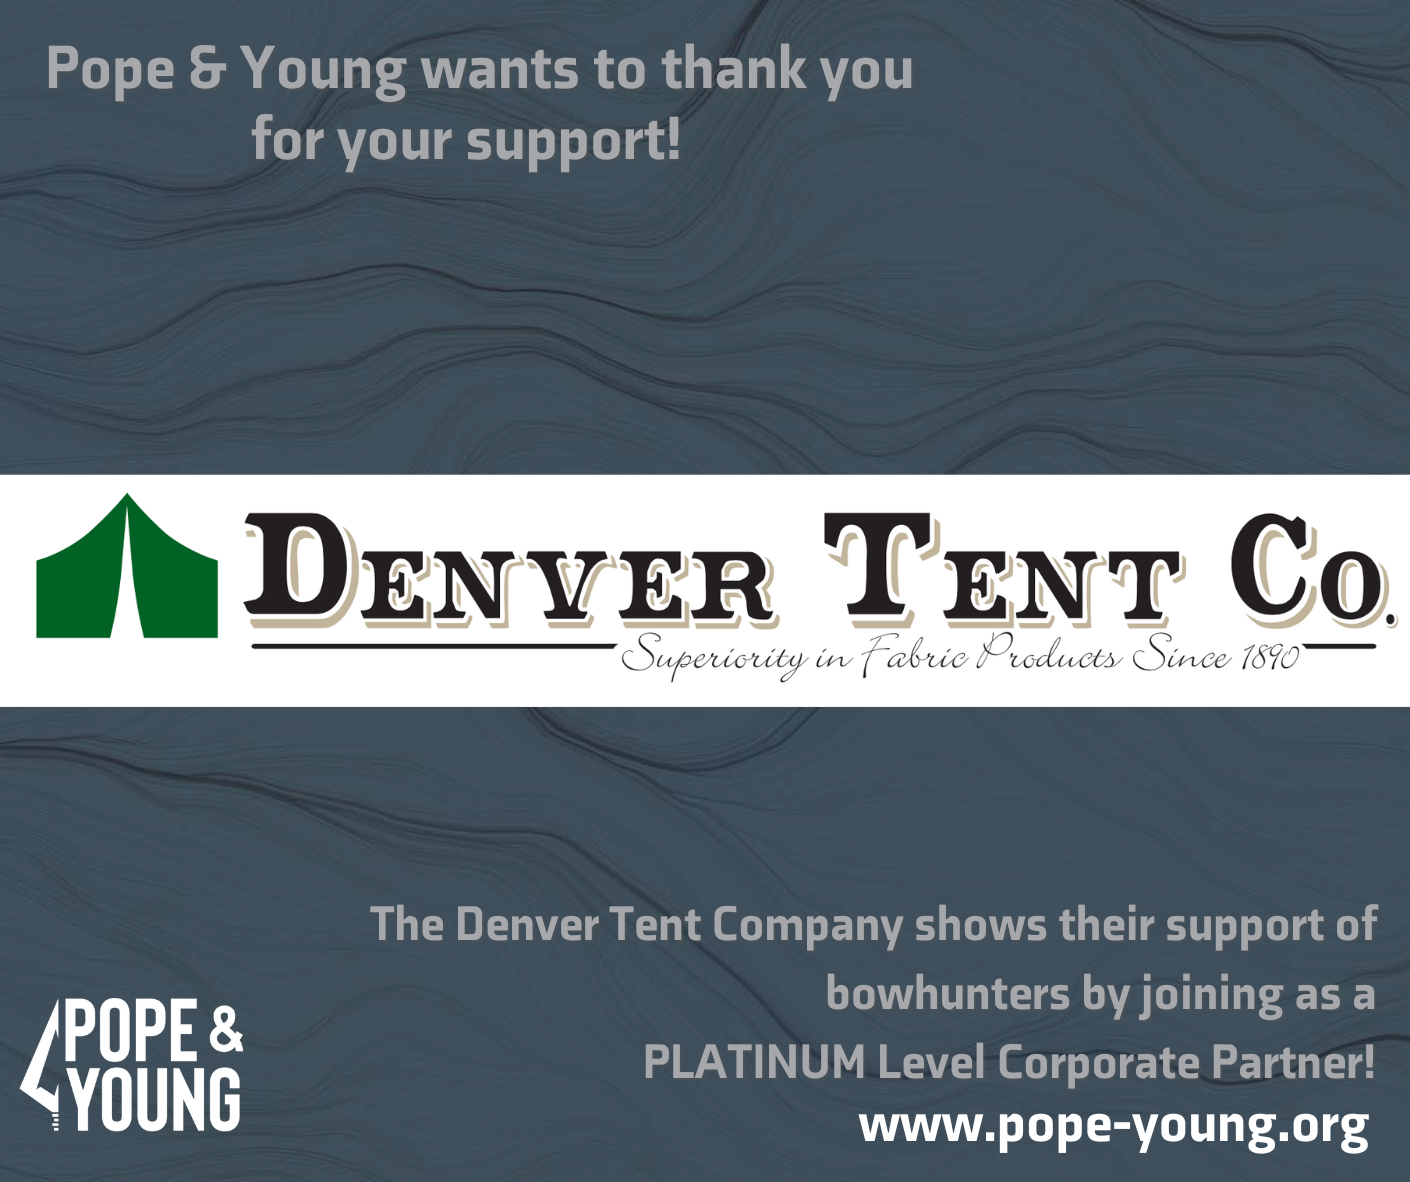 
THE DENVER TENT COMPANY JOINS POPE AND YOUNG